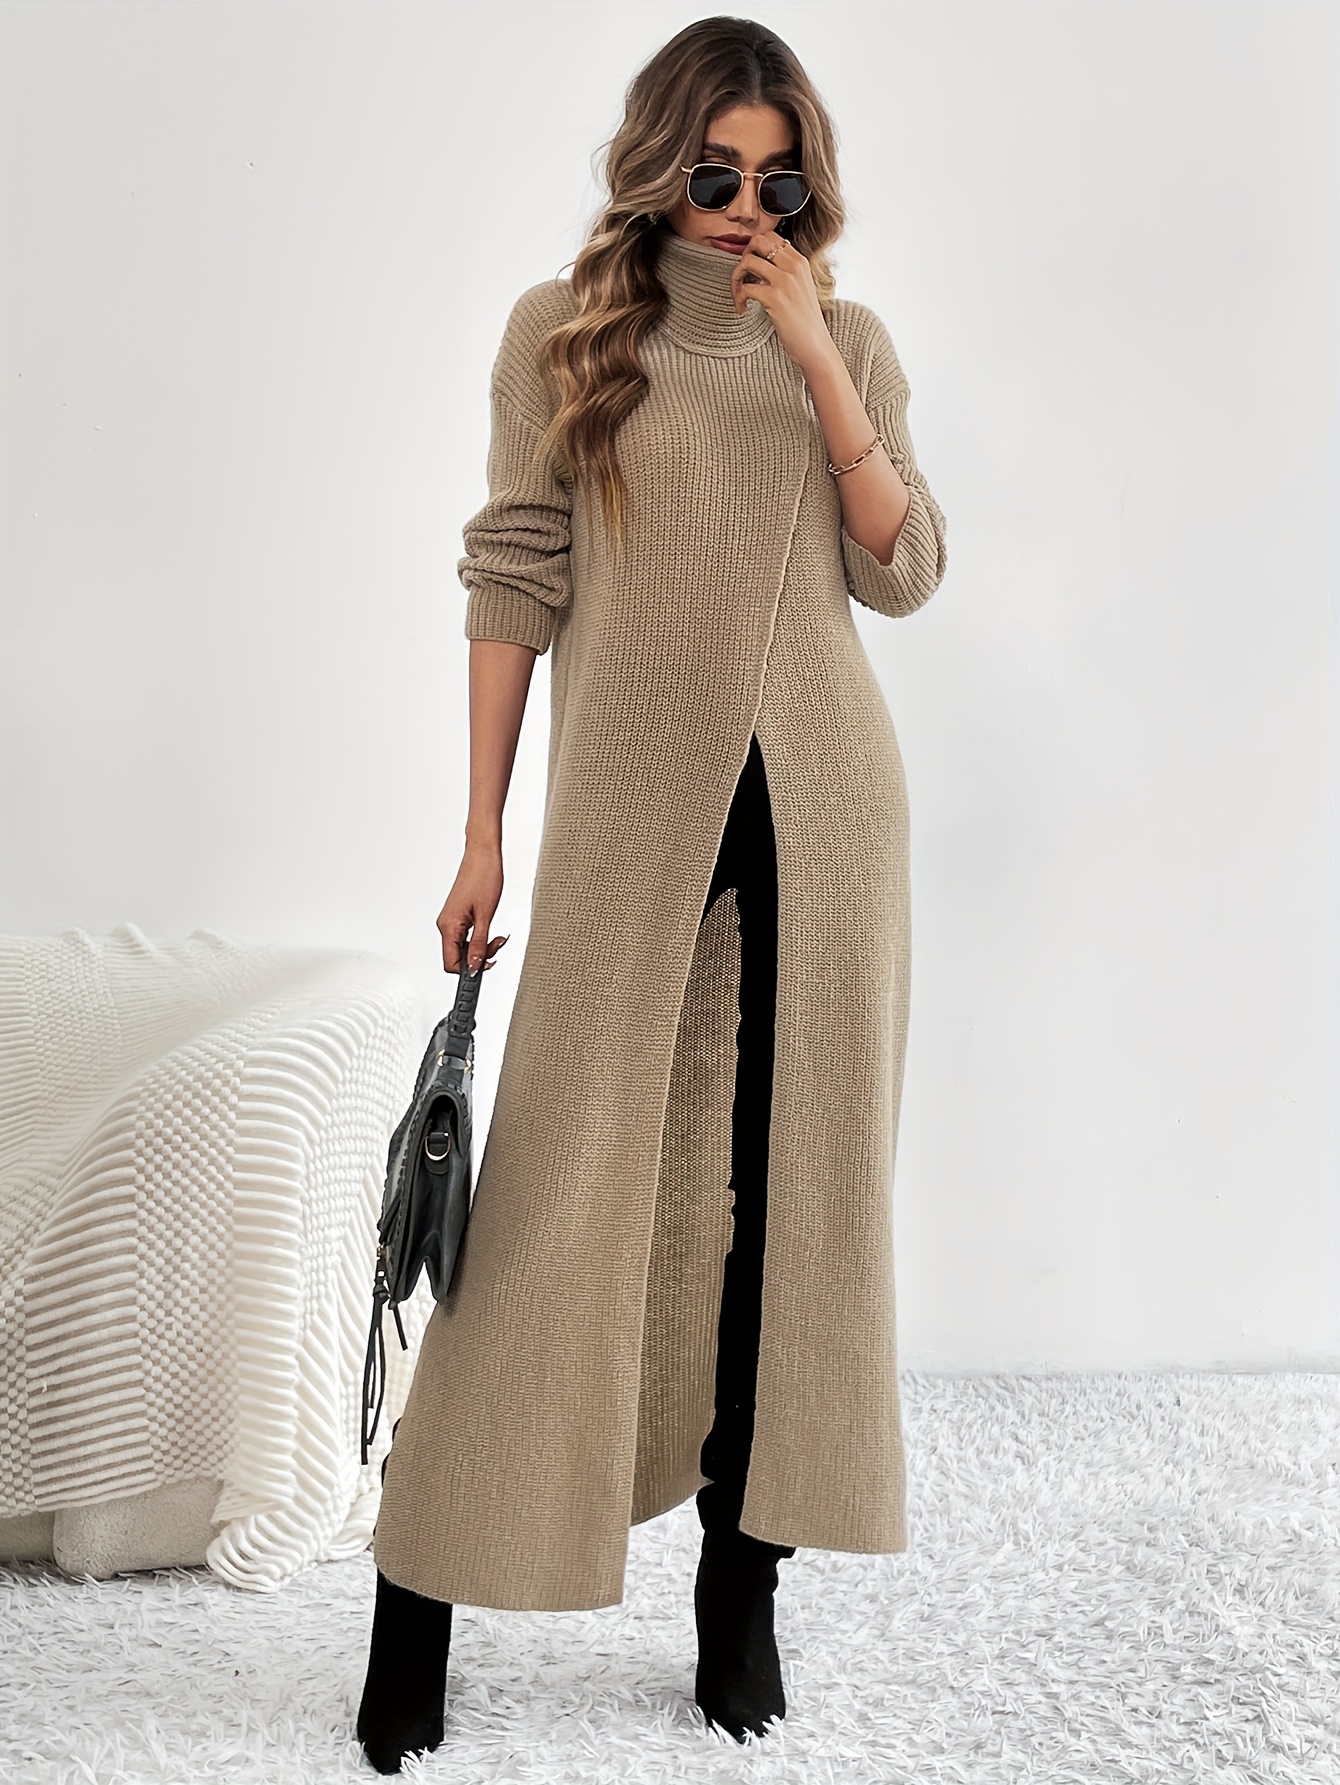 The Solid High Waisted Split Maxi Dress